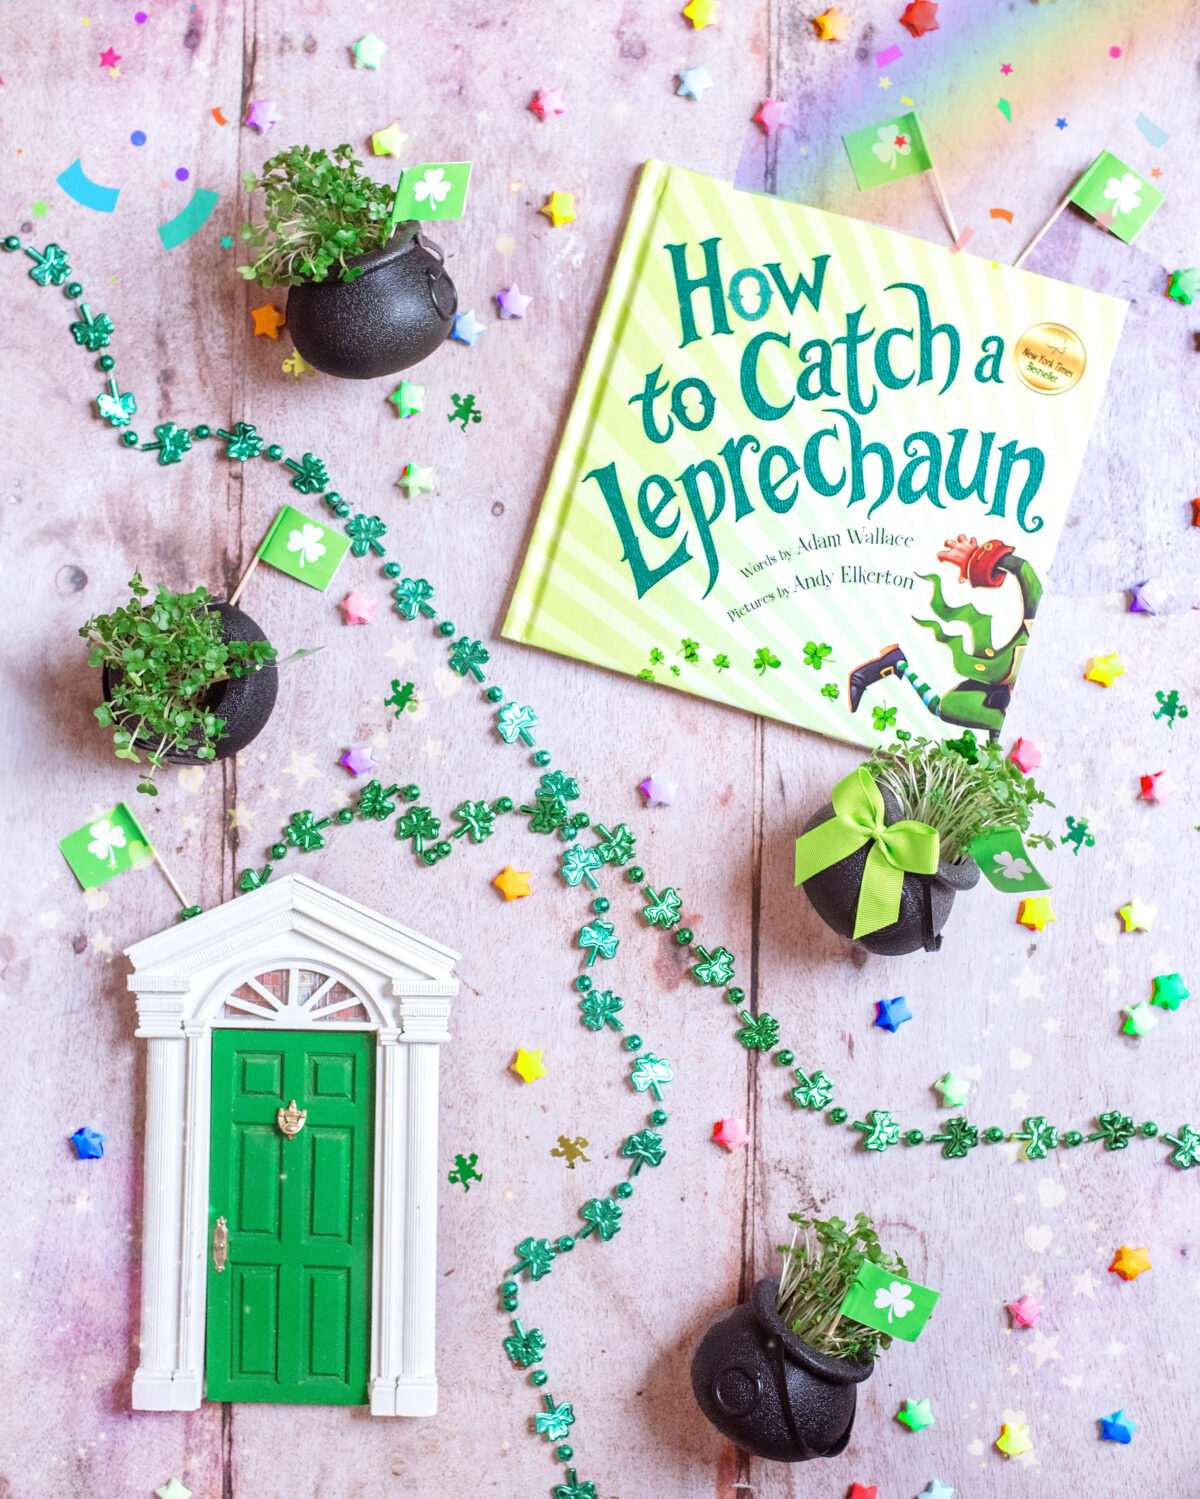 Image shows St. Patrick's Day Leprechaun door, rainbow lucky stars, shamrock in little black cauldon pots of gold, green metallic shamrock necklaces and a  How to Catch a Leprechaun Book. Easy, last minute crafts for celebrating St. Patrick's day with kids complete with supply list.